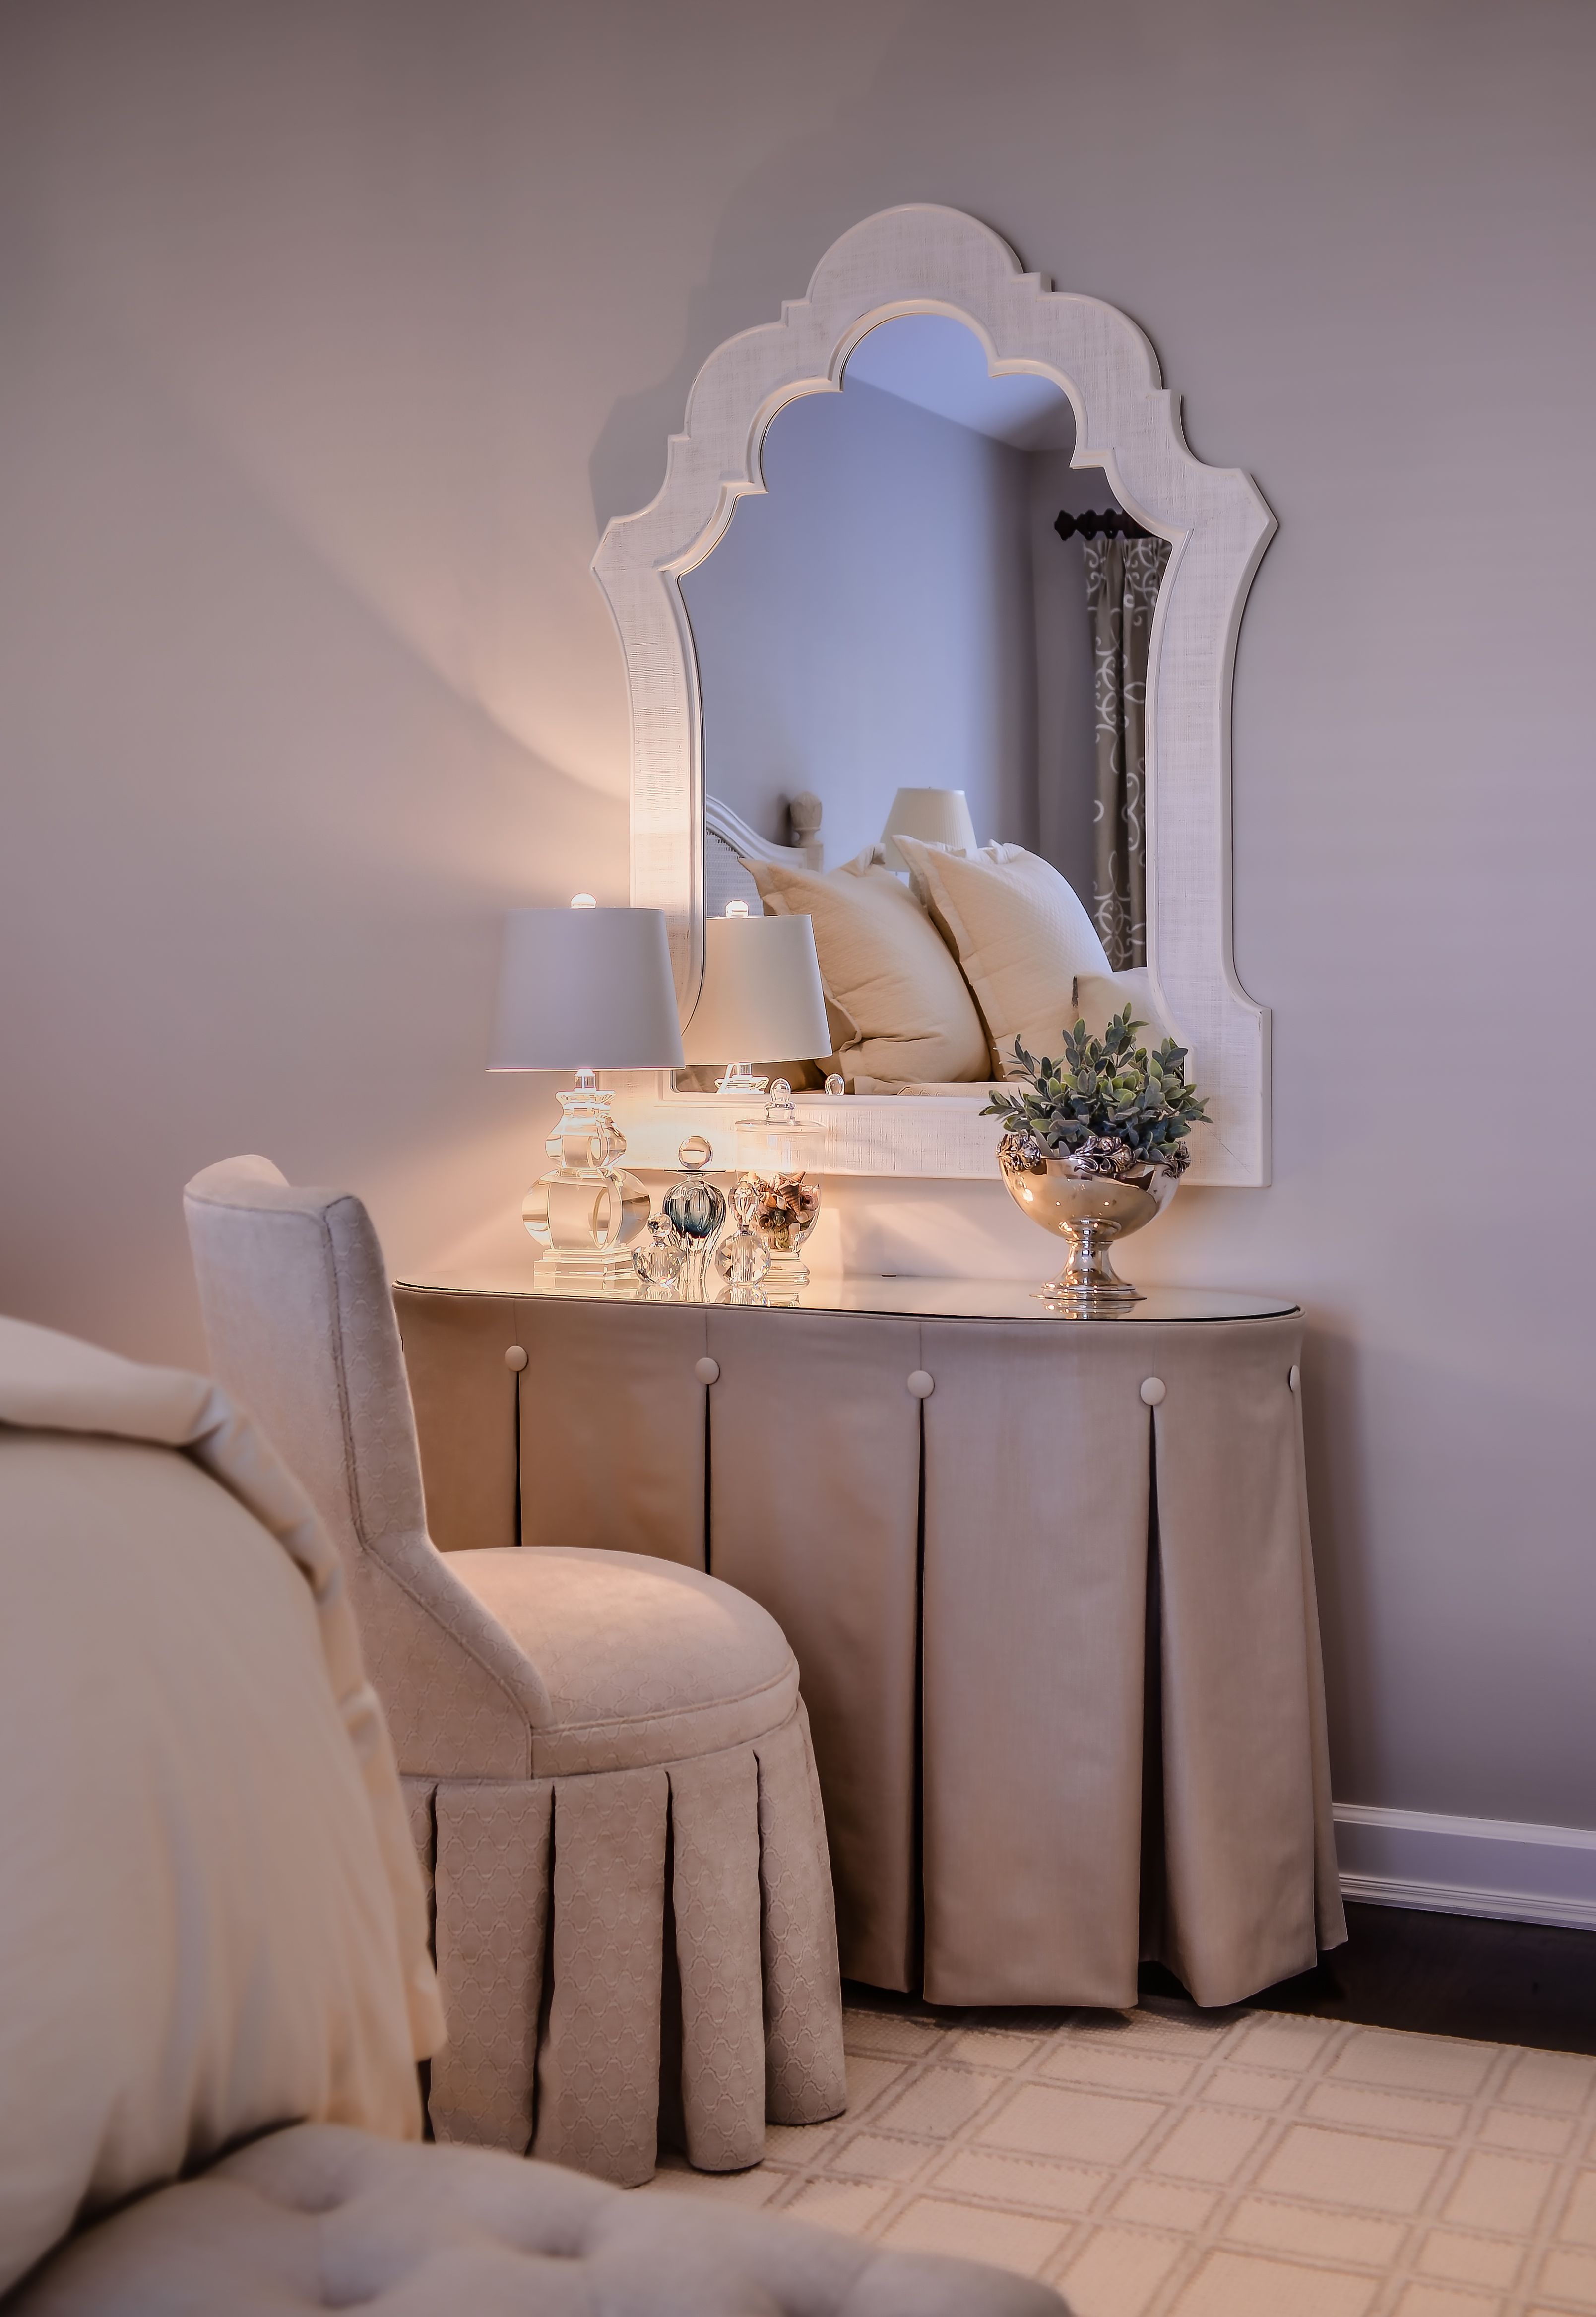 Ladys Dressing Table Decoration with Flowers, Beautiful Details, Stock  Image - Image of bright, arrangement: 103412887